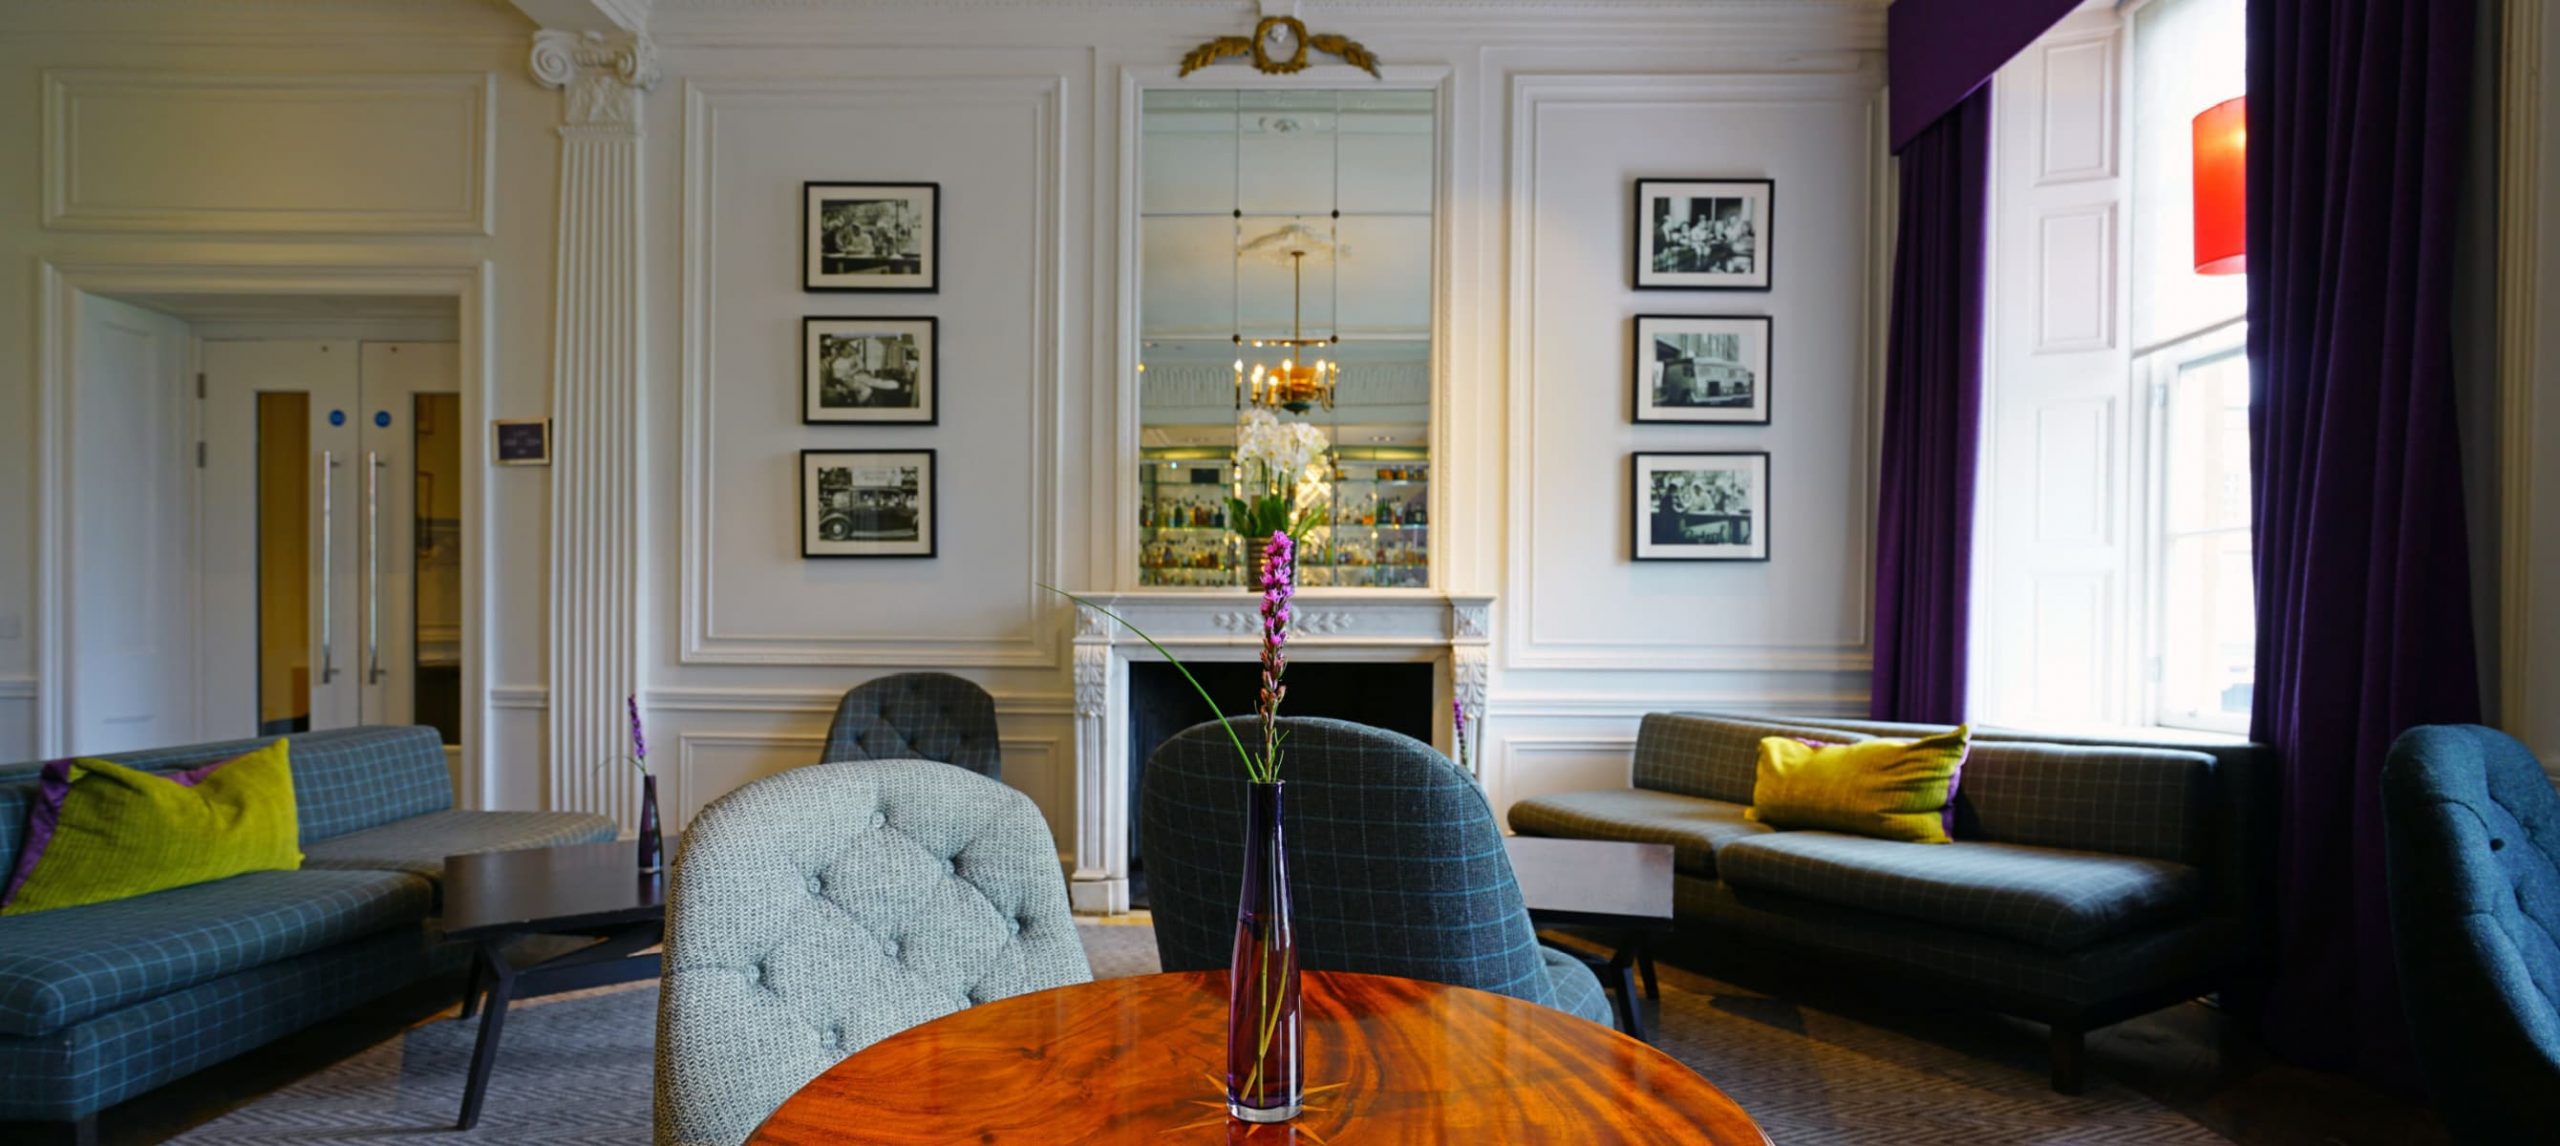 Suite at the Blythswood Square Hotel, in Glasgow, Scotland.